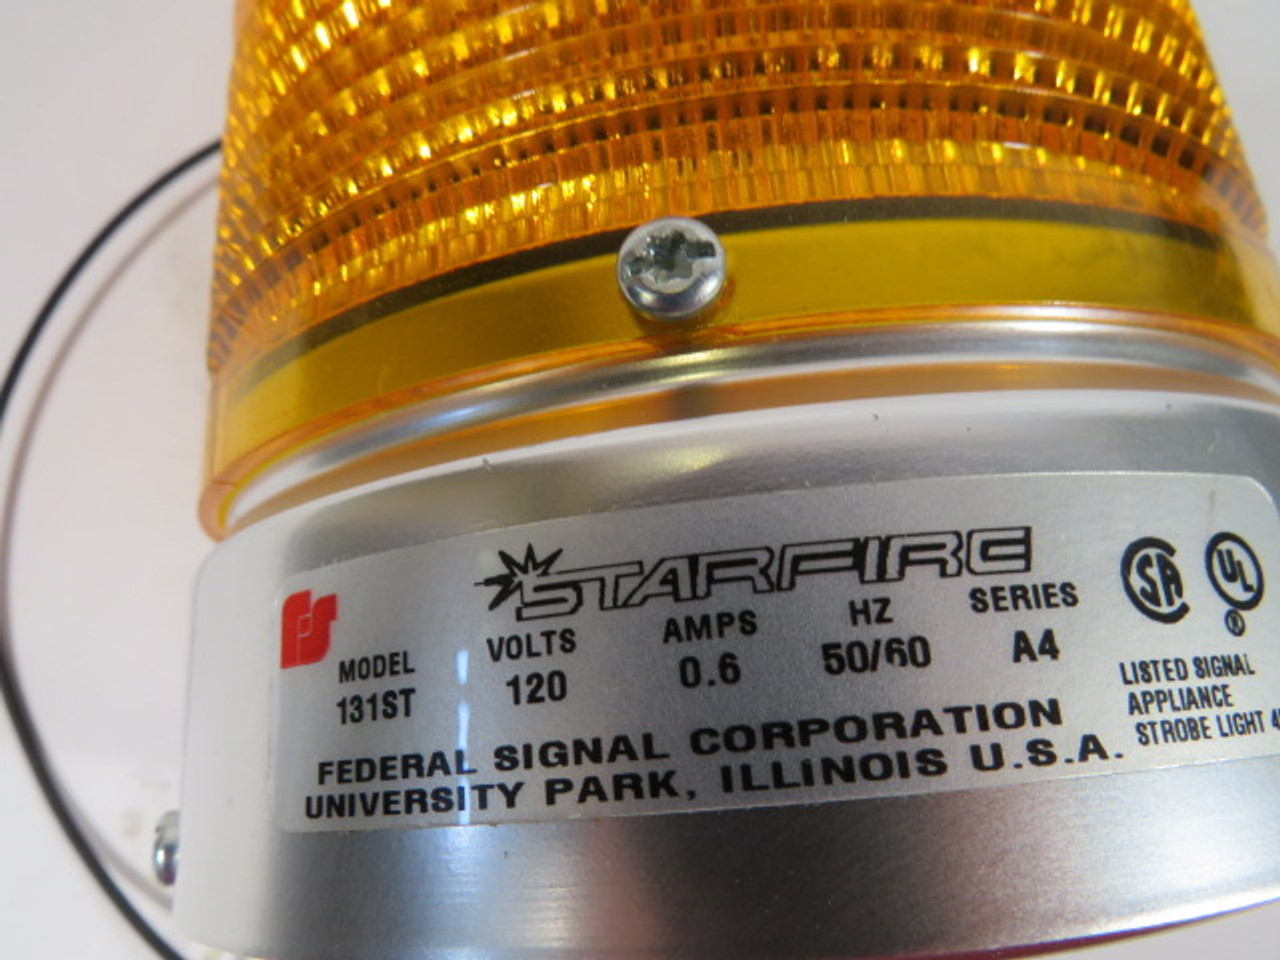 Federal Signal 131ST-120A Amber StarFire Strobe Warning Light 120V@.6A USED